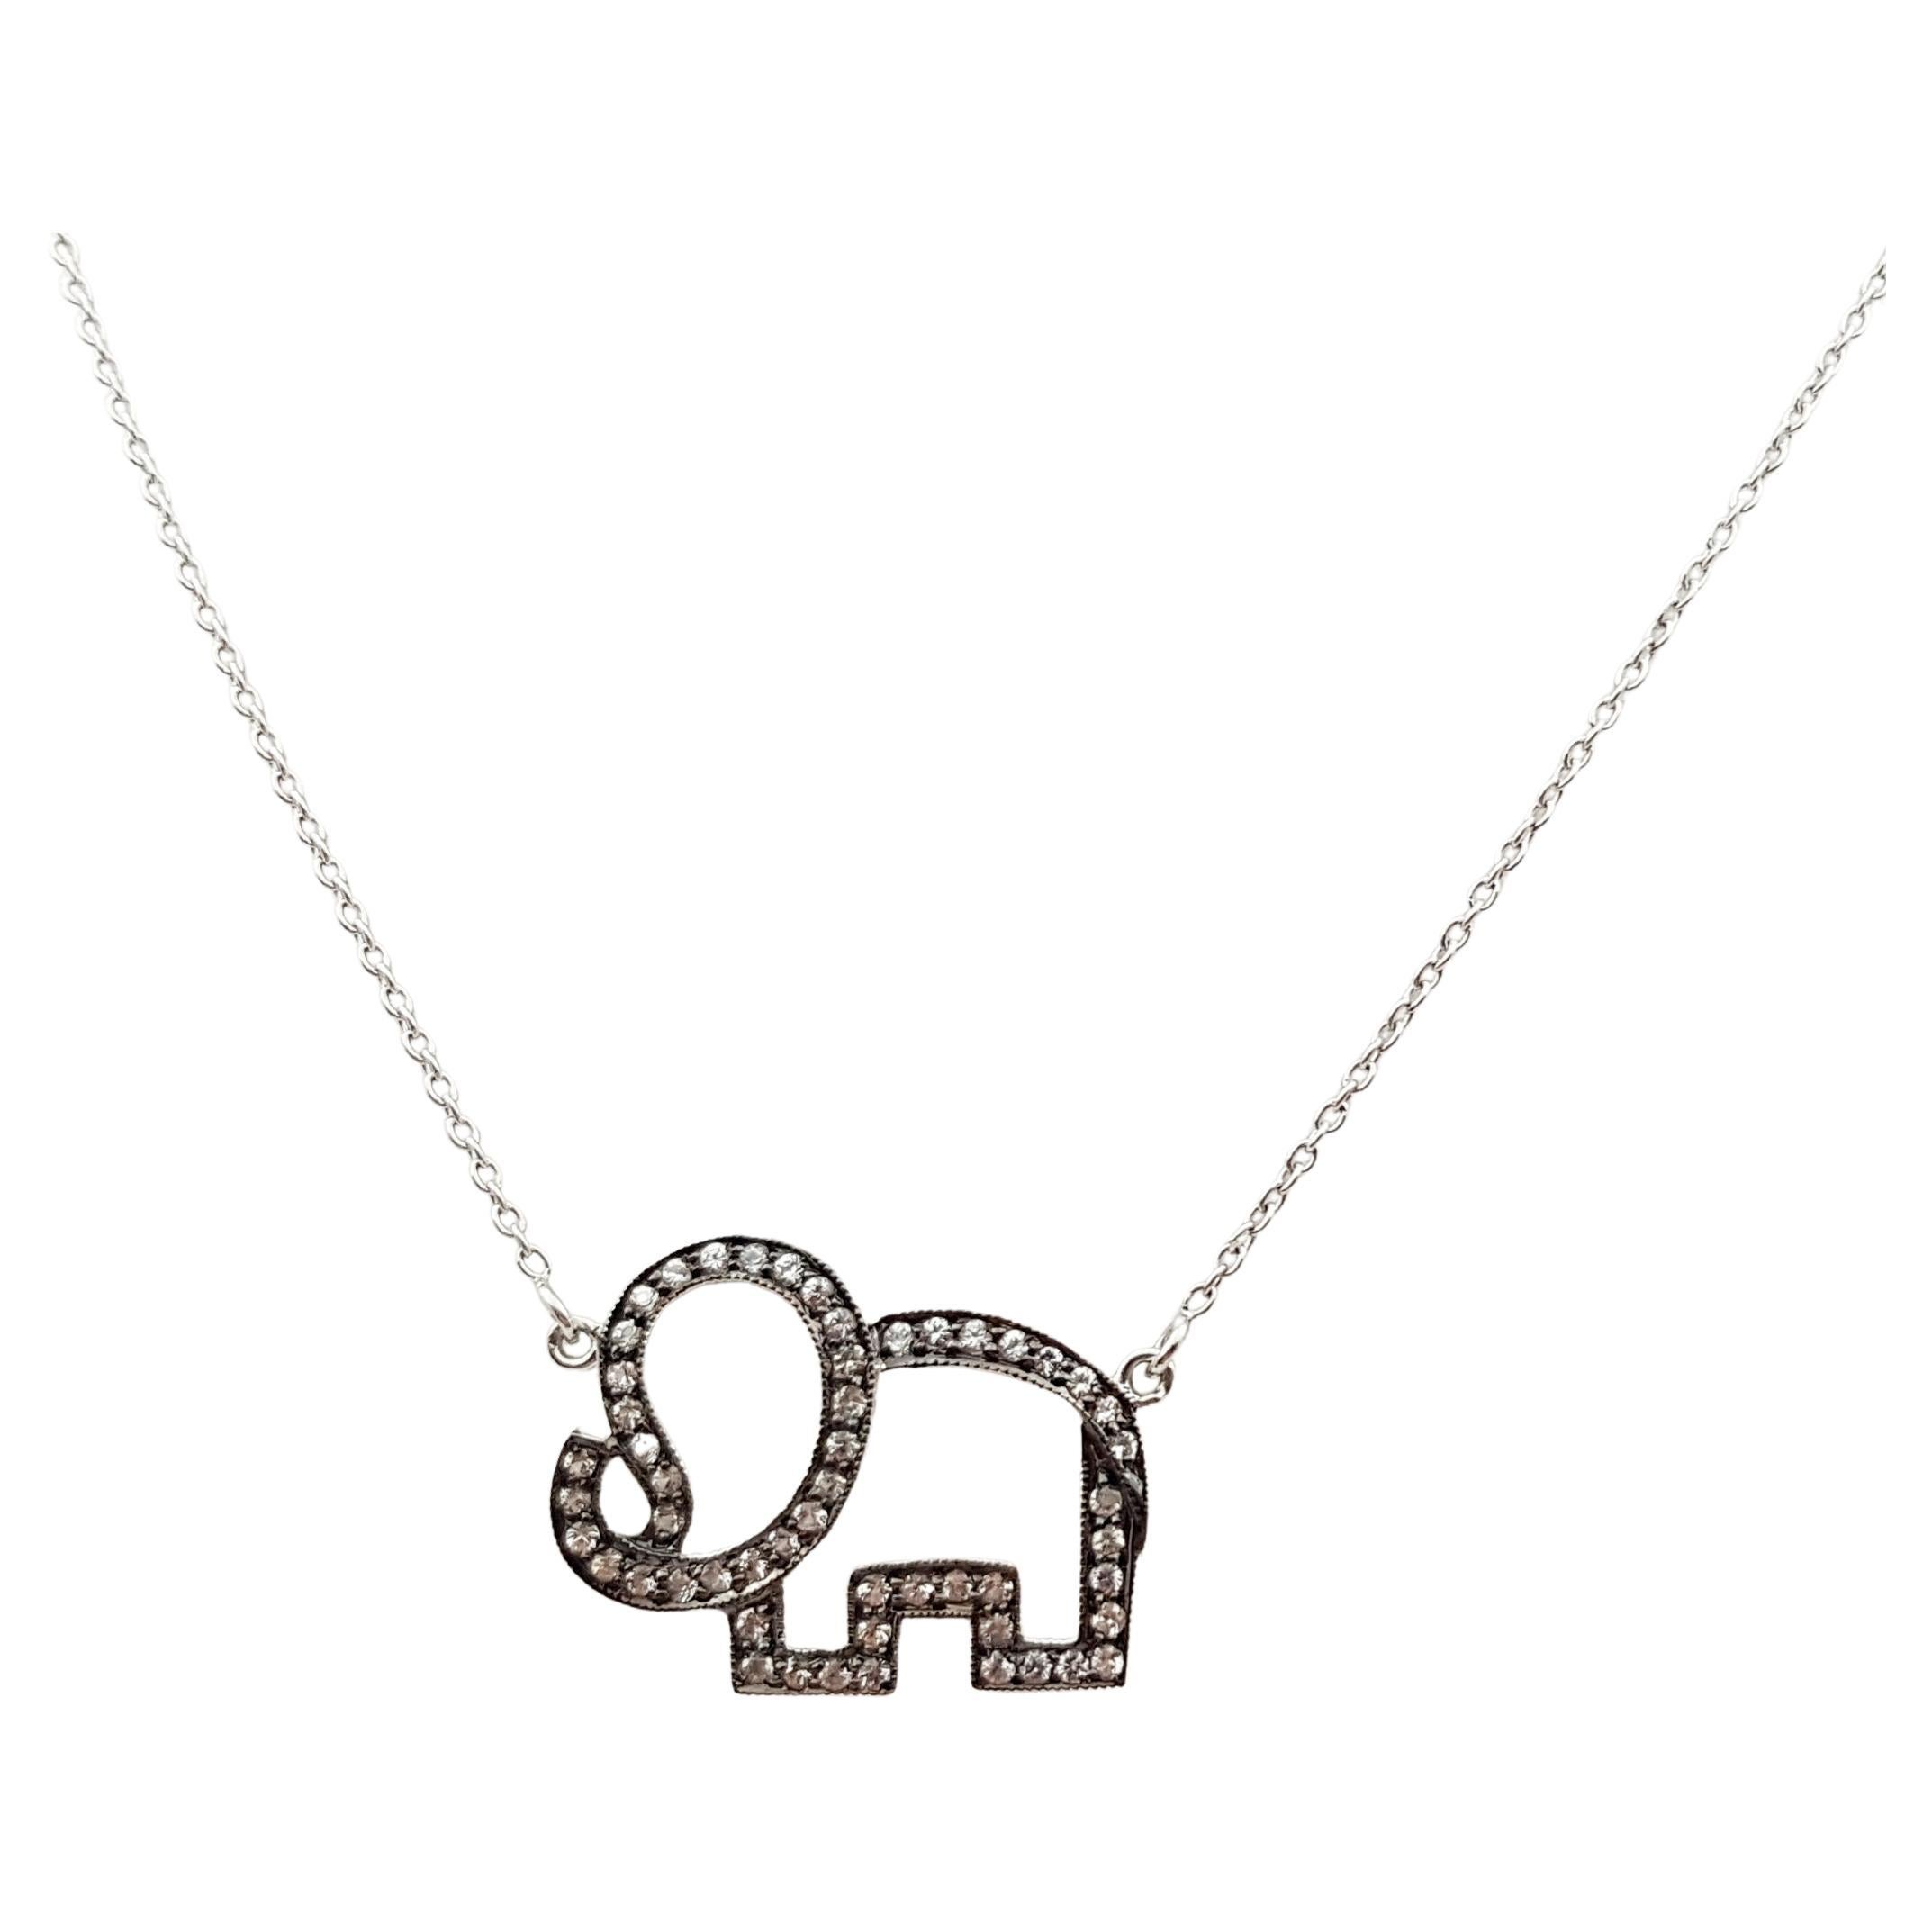 White Sapphire Elephant Necklace set in Silver Settings